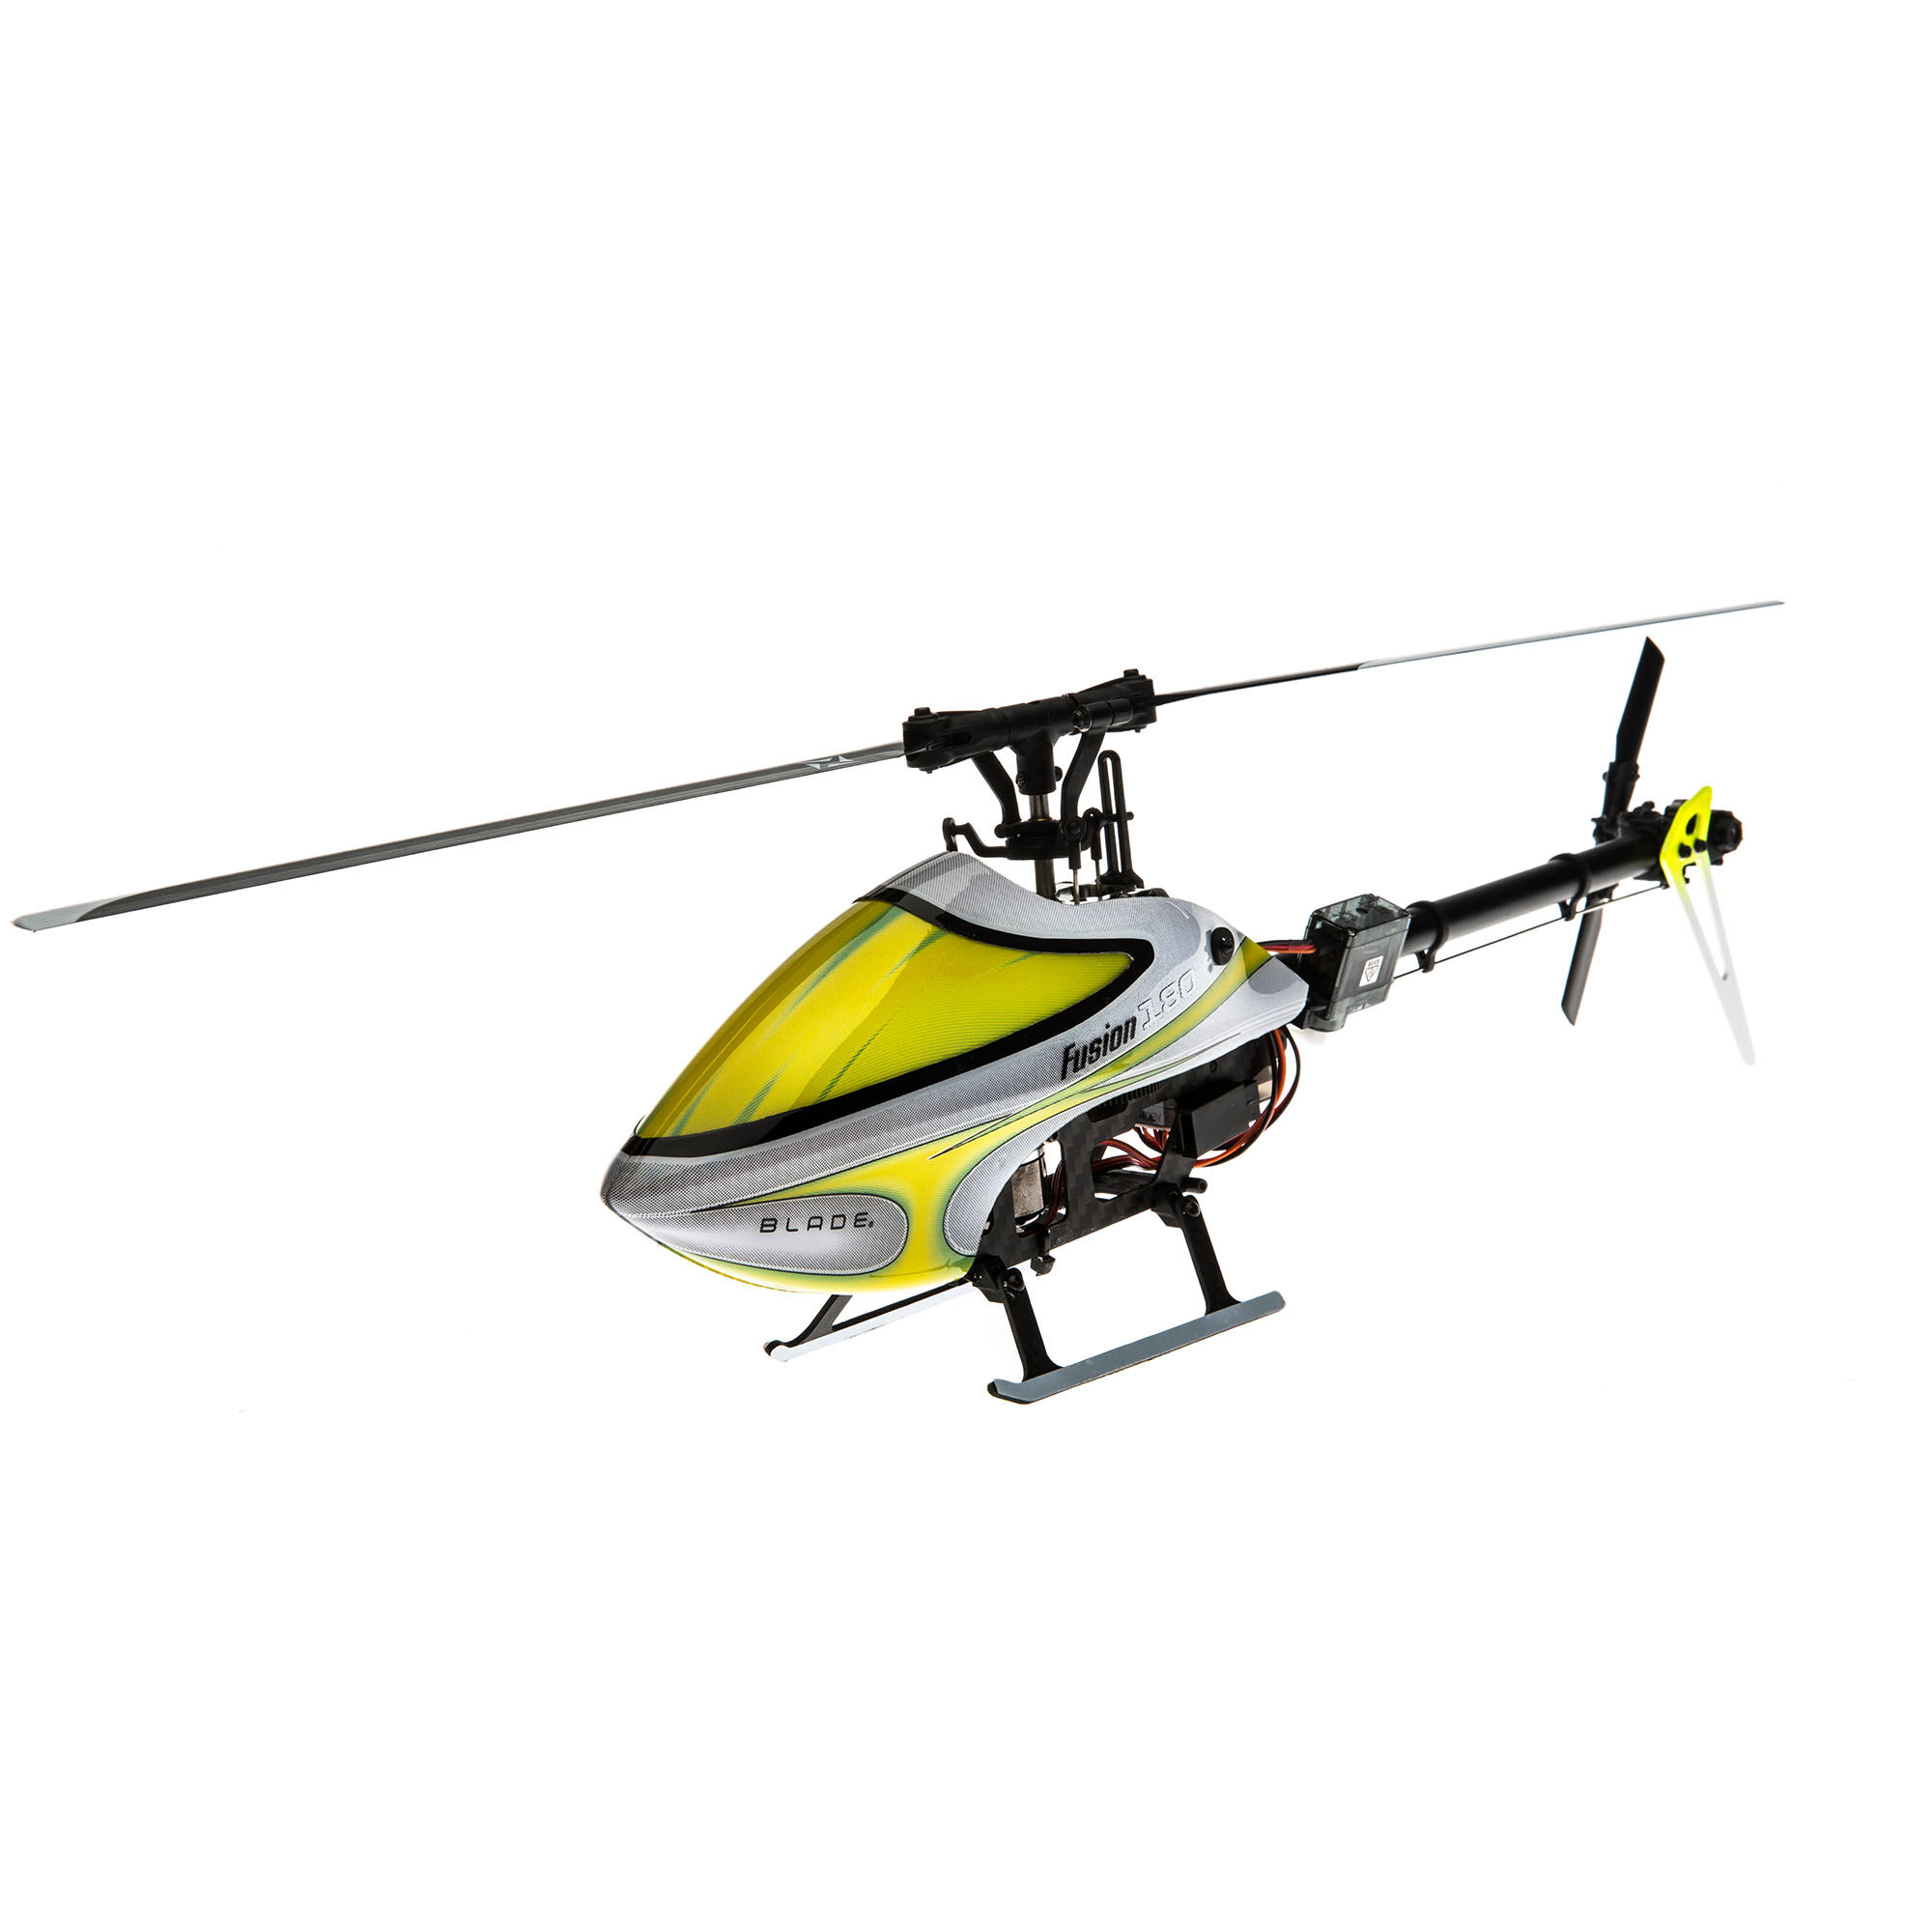 blade rc helicopter website